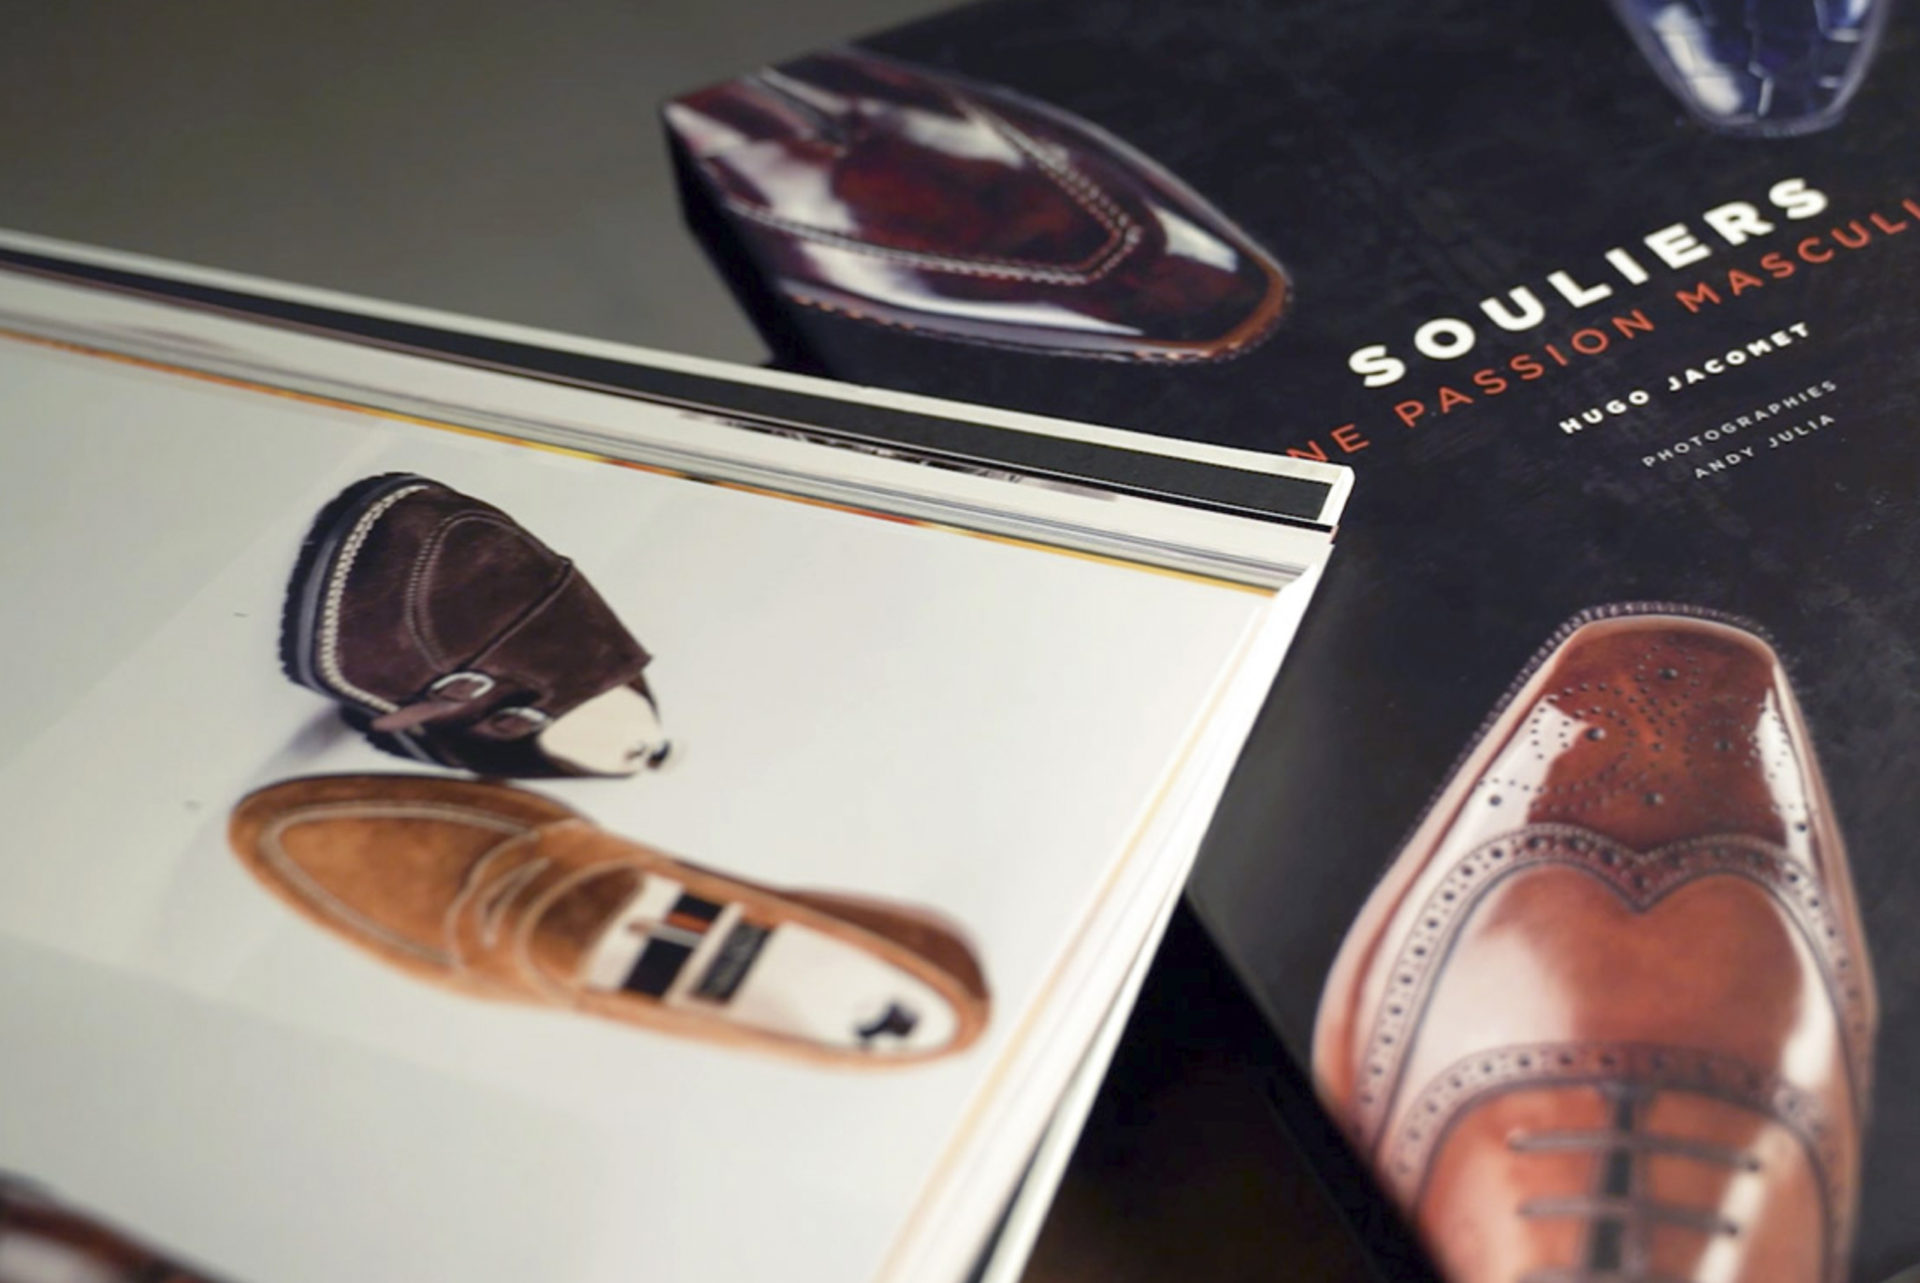 Bontoni’s ‘Brillantina’ Featured On Cover Of ‘Souliers: Une Passion Masculine’ Book